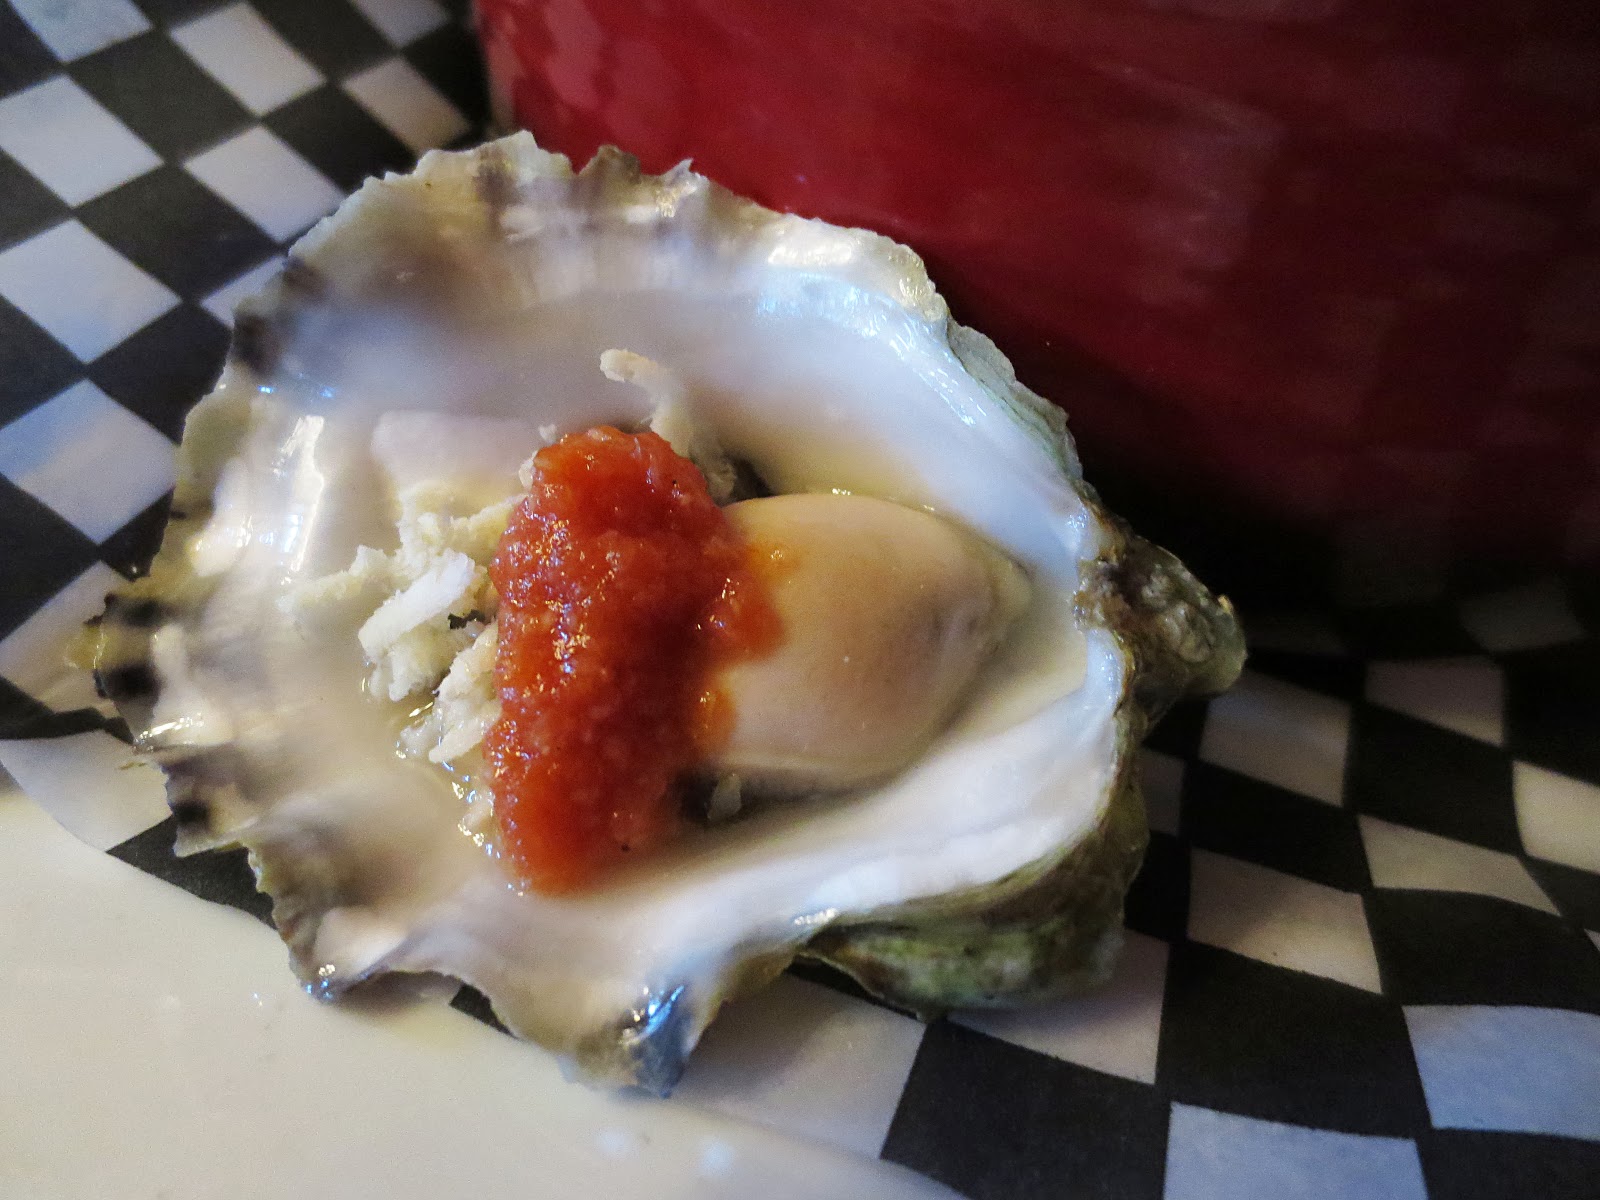 Raw oyster with spicy salsa and freshly graded horseradish